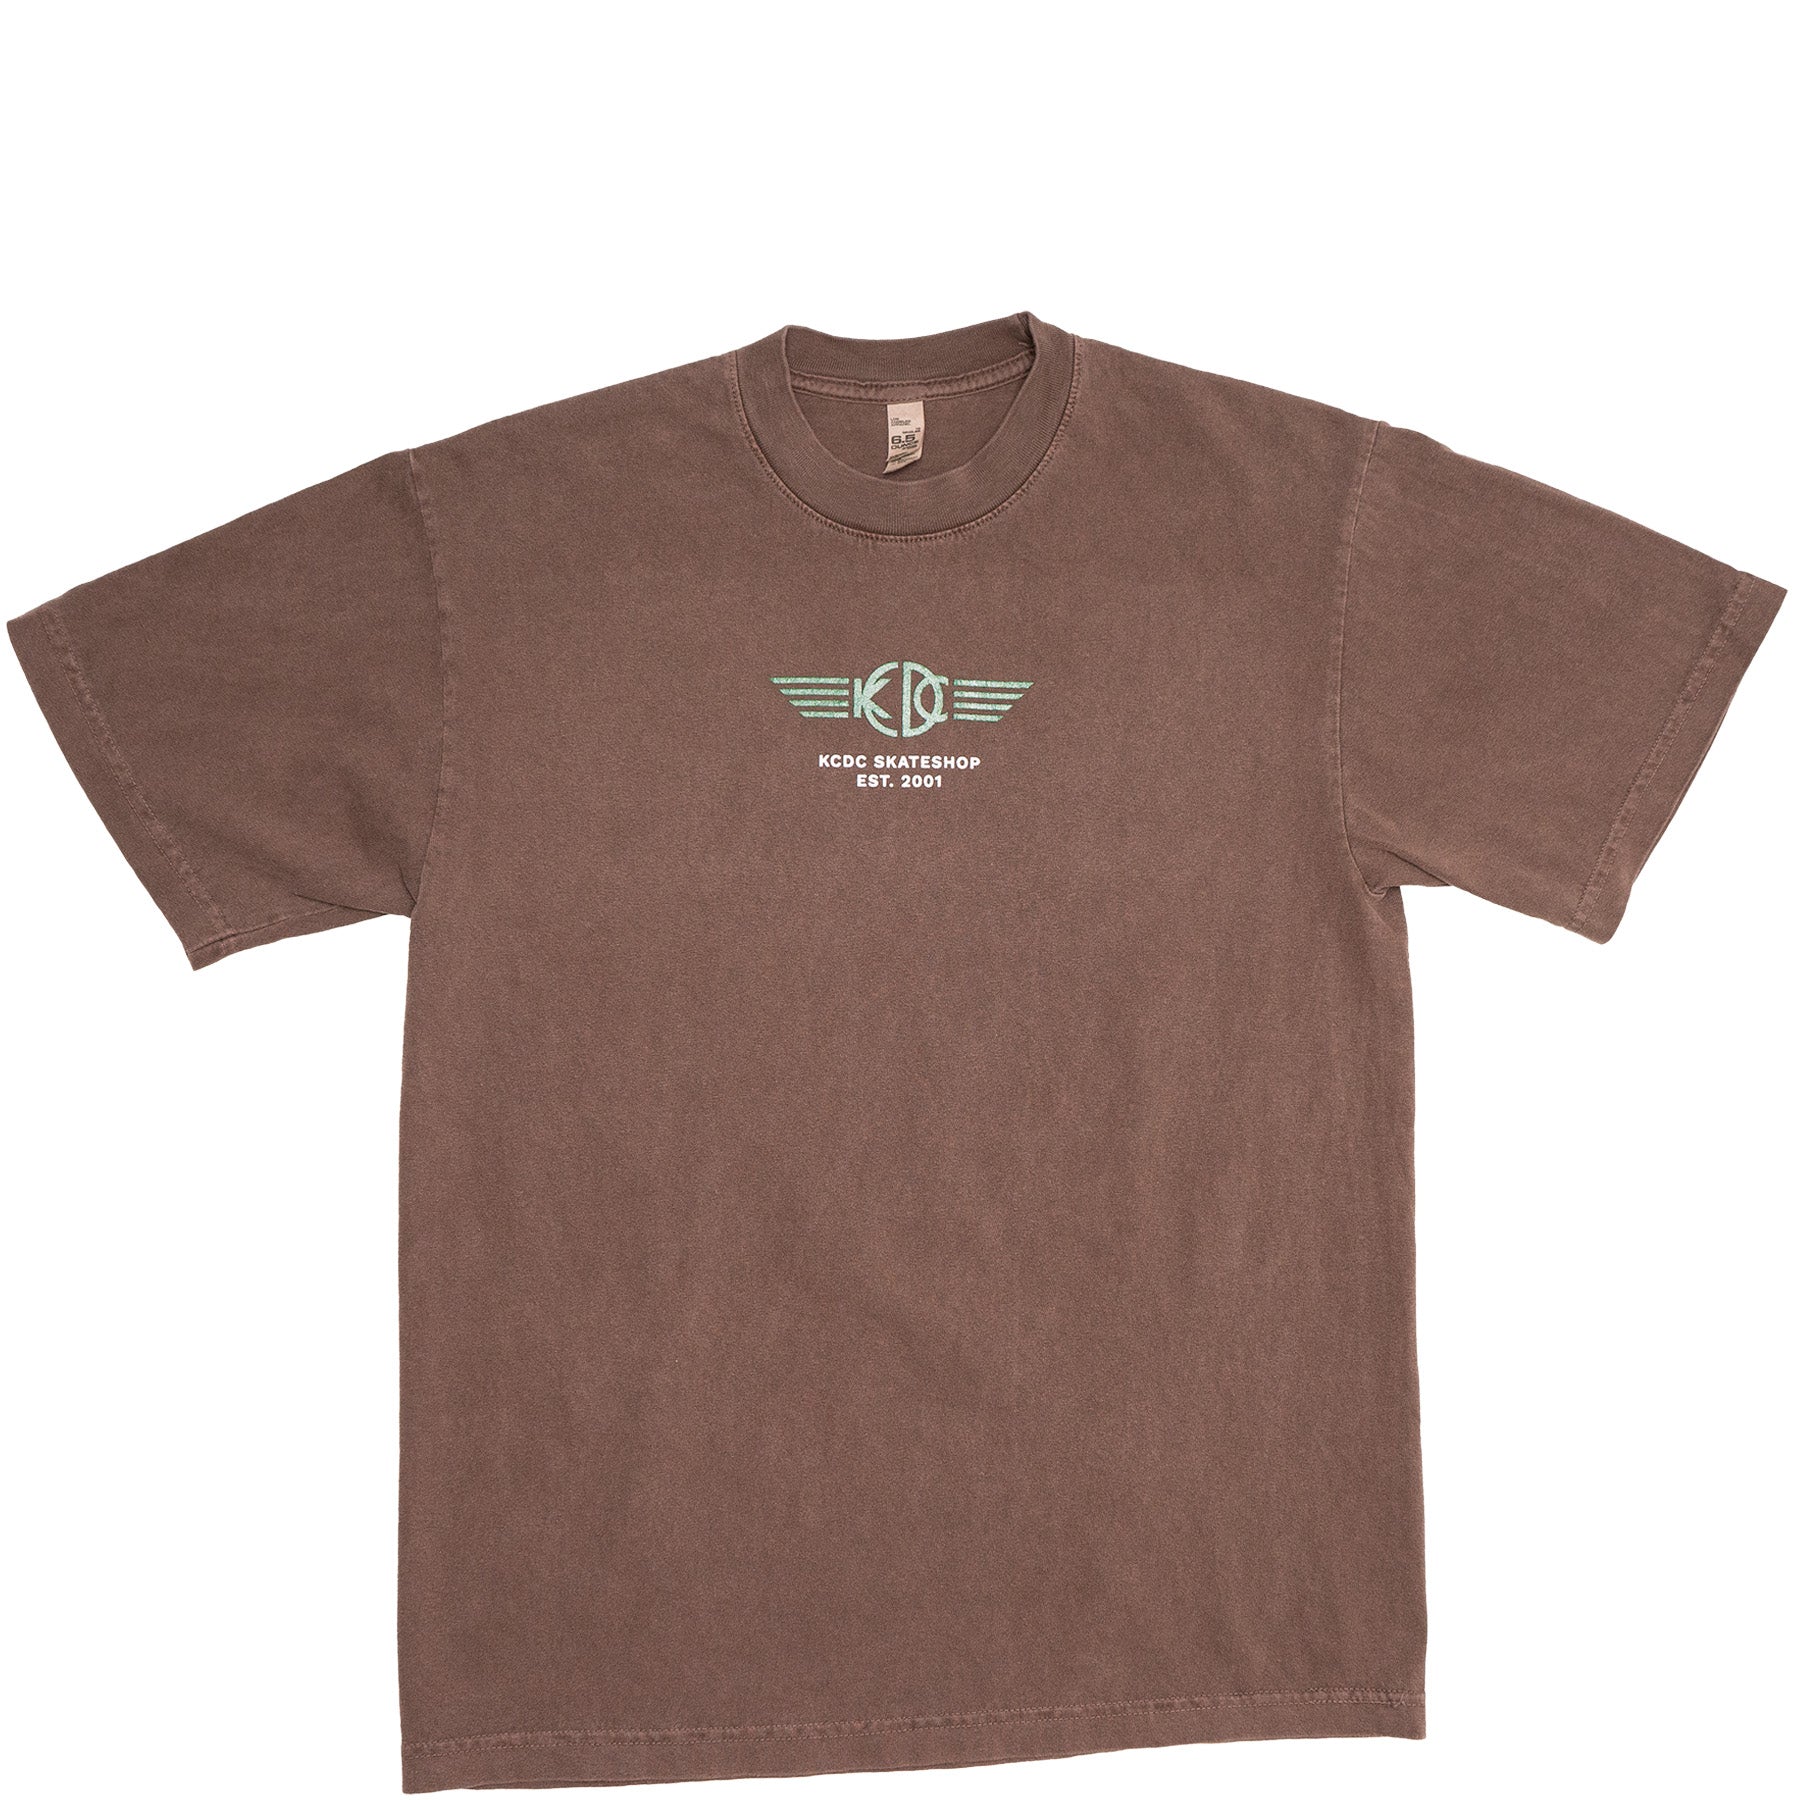 KCDC - Shop Tee - Clove, Forest Green & White